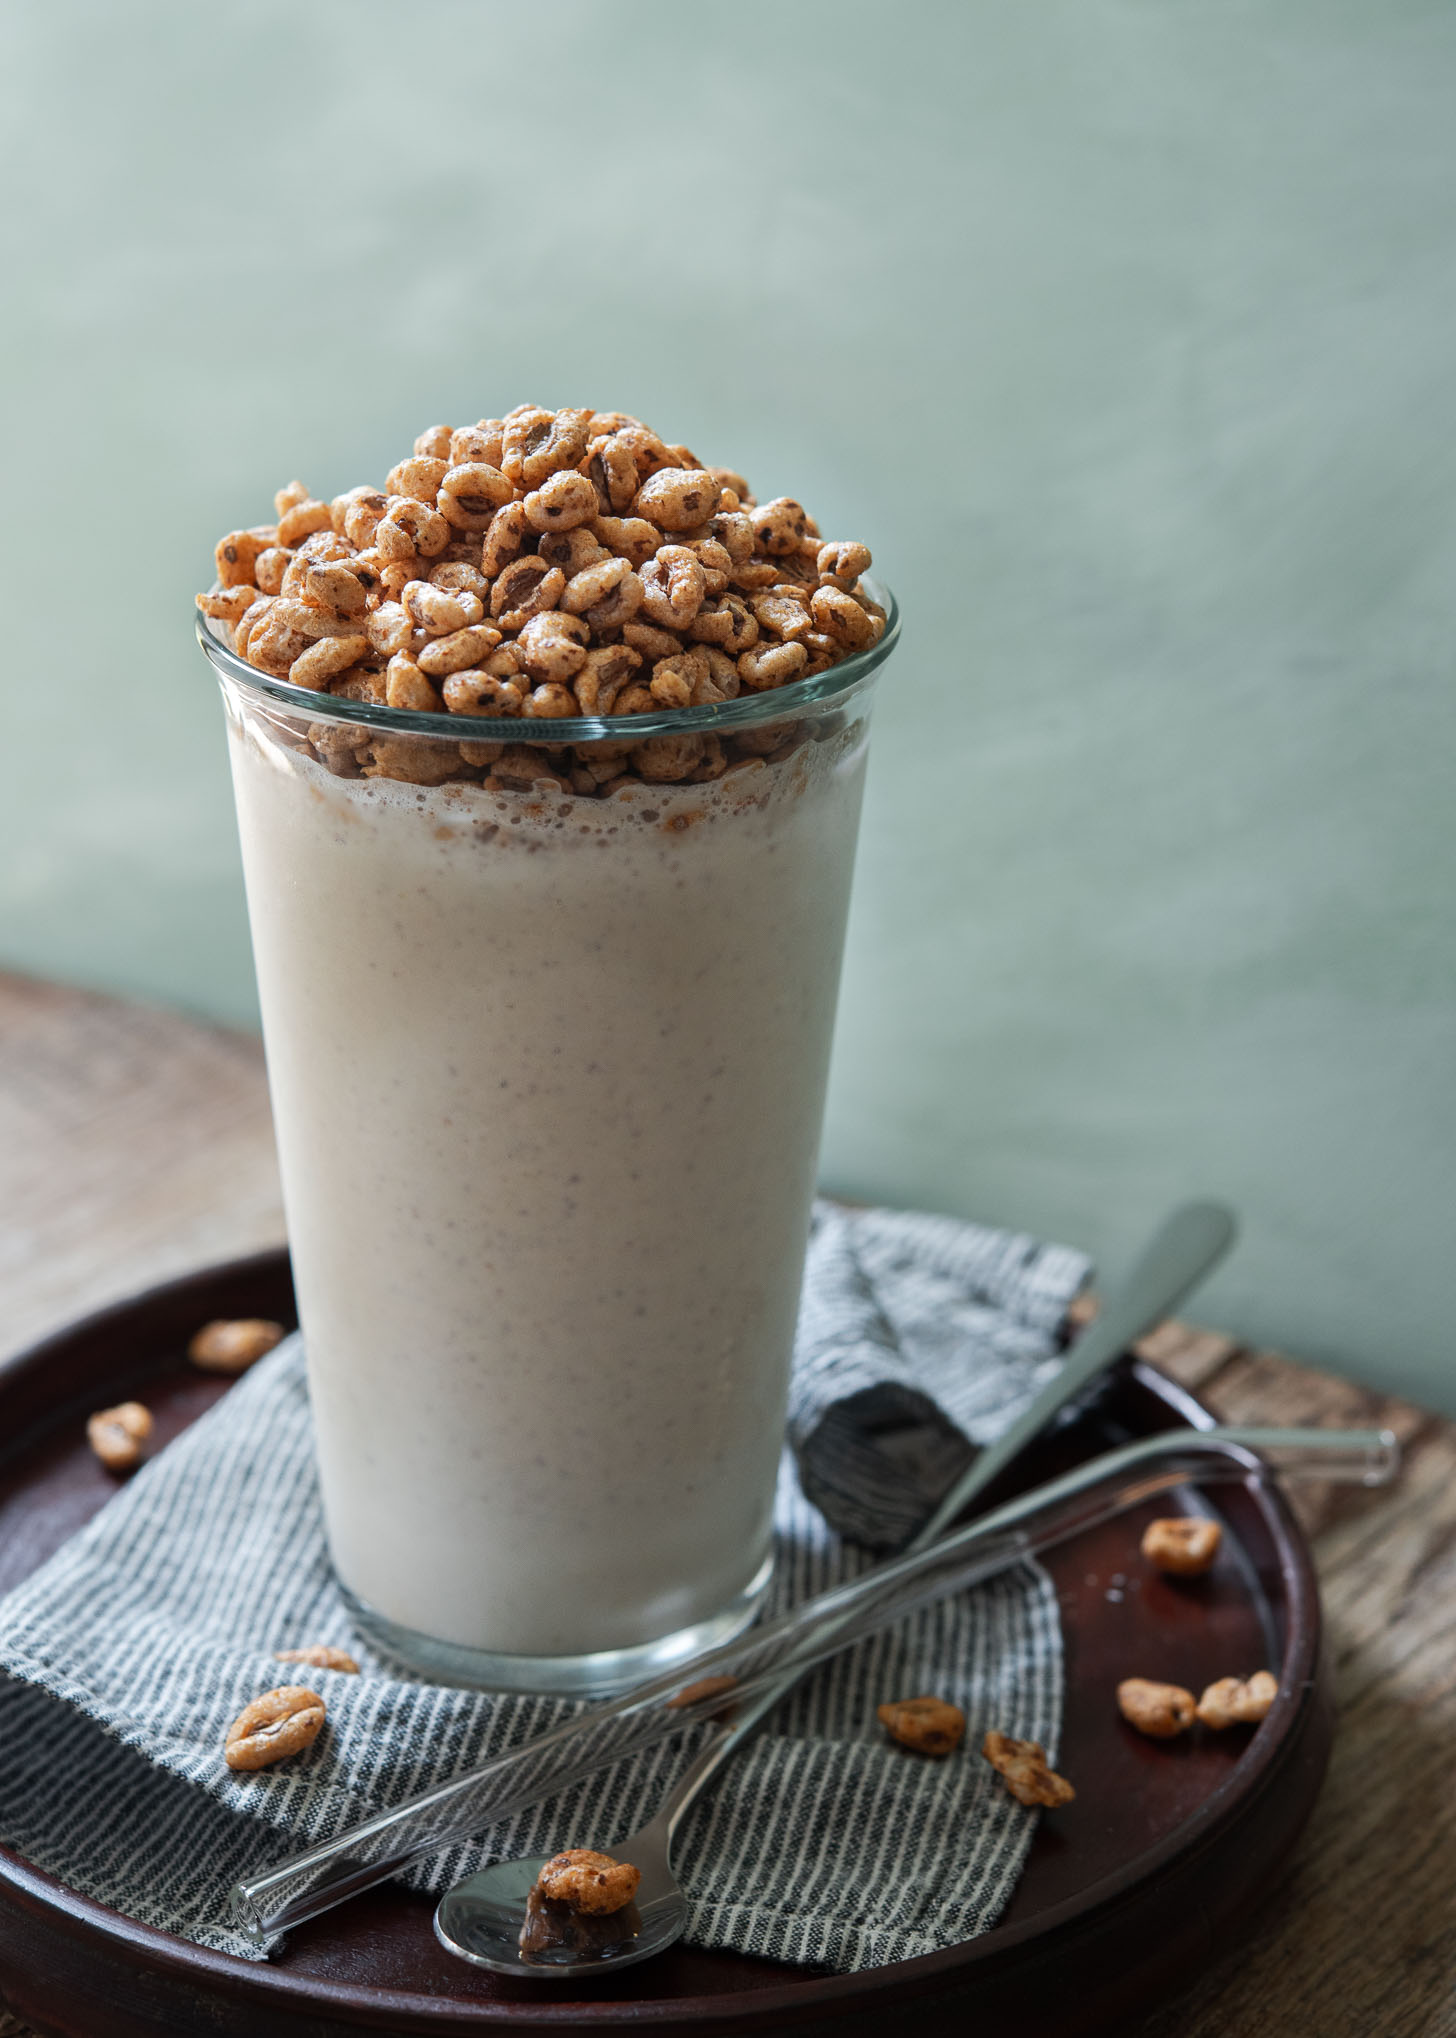 Jolly pong shake (cereal milkshake) made with Korean puffed wheat cereal.